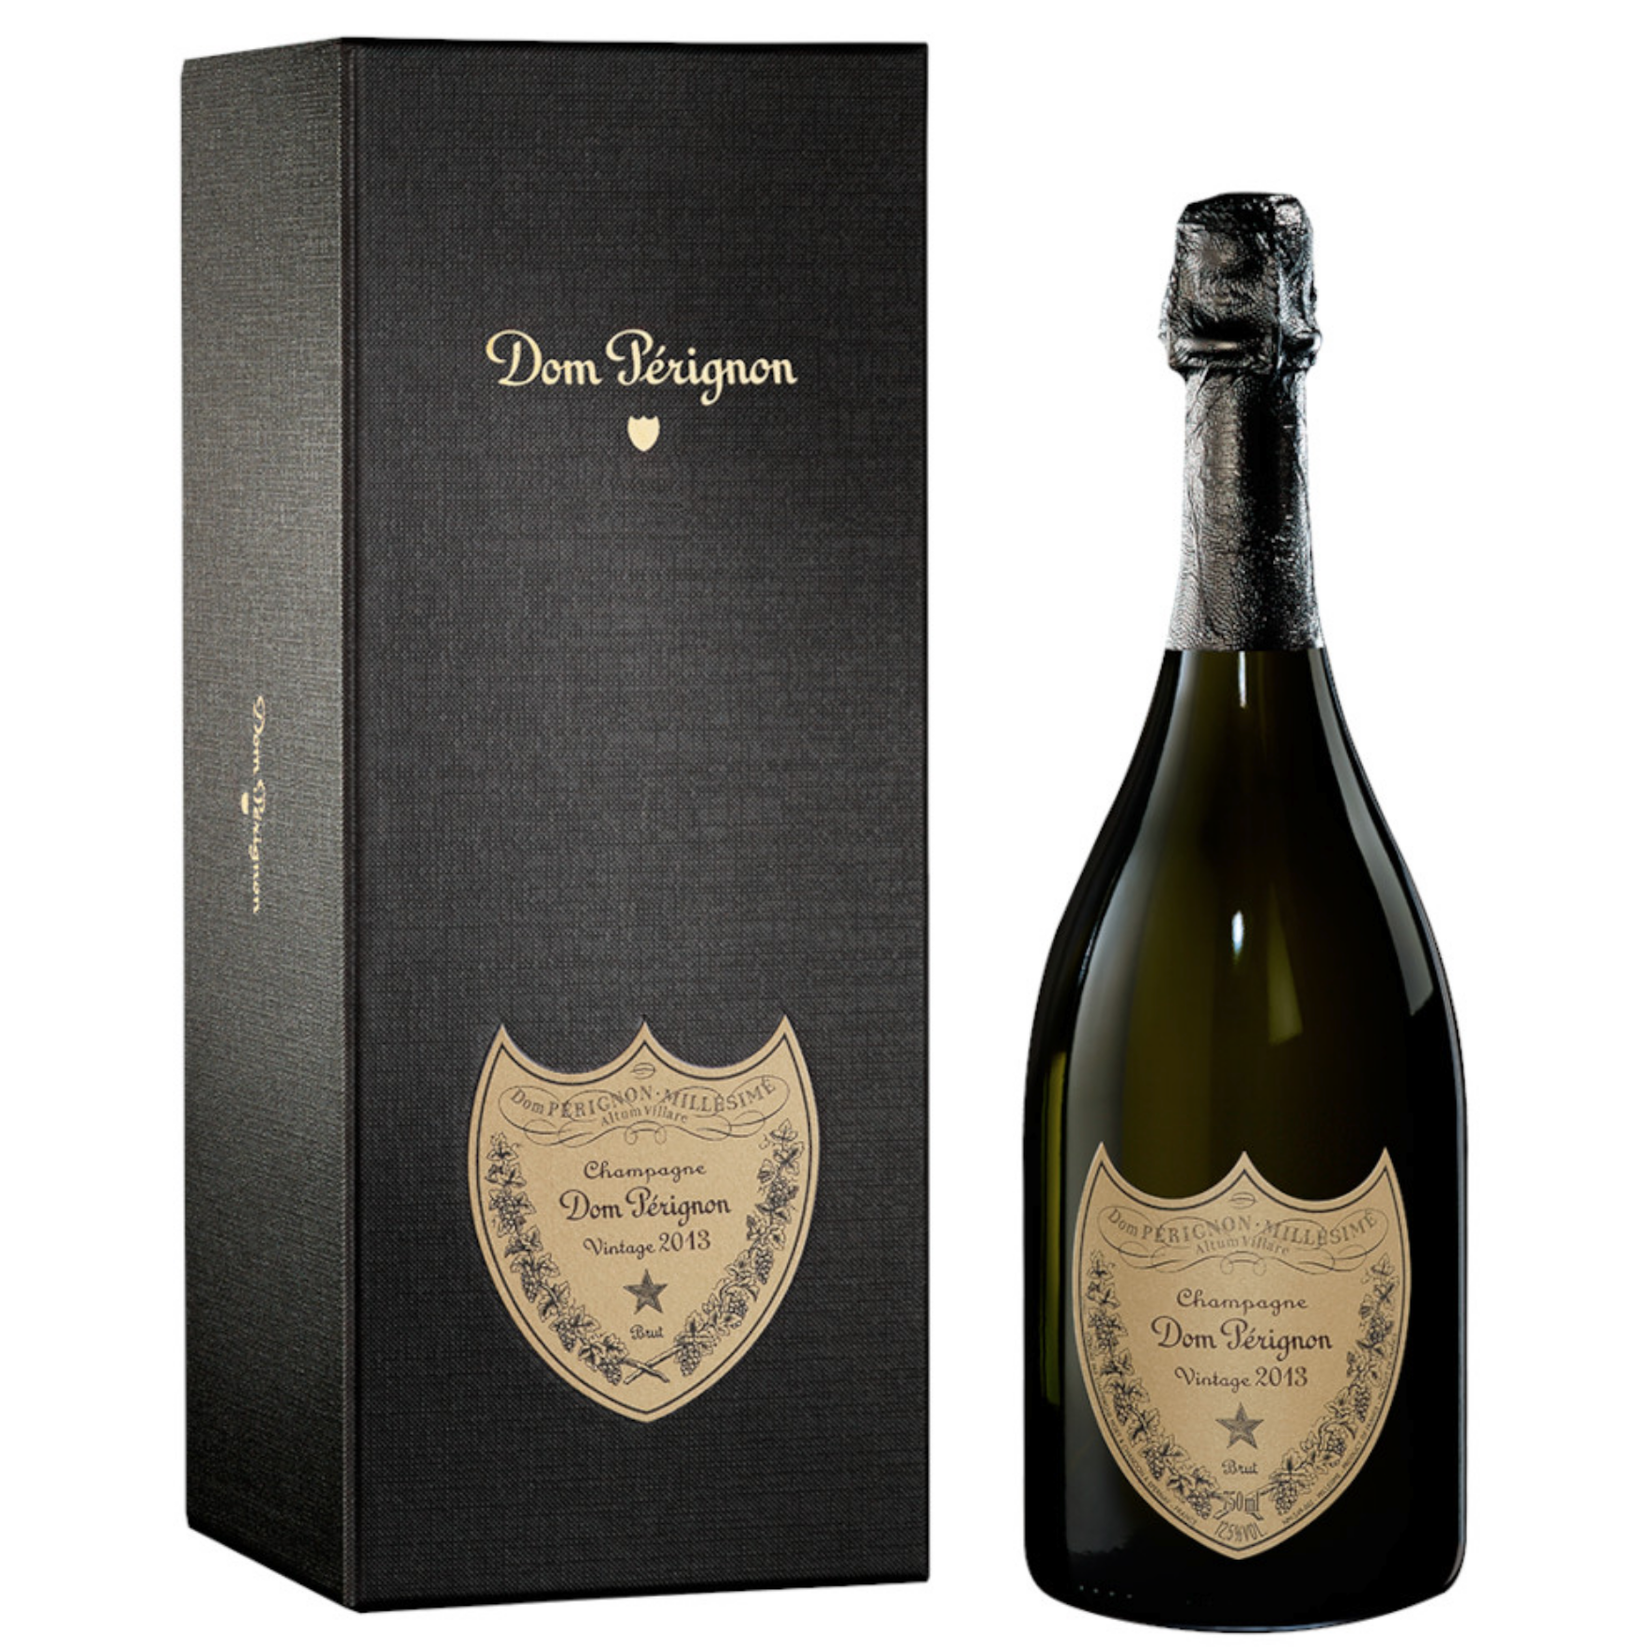 2013, Vintage Dom Perignon Brut w/ GIFT BOX, Champagne, Epernay, Champagne, France, 12.5% Alc, CT